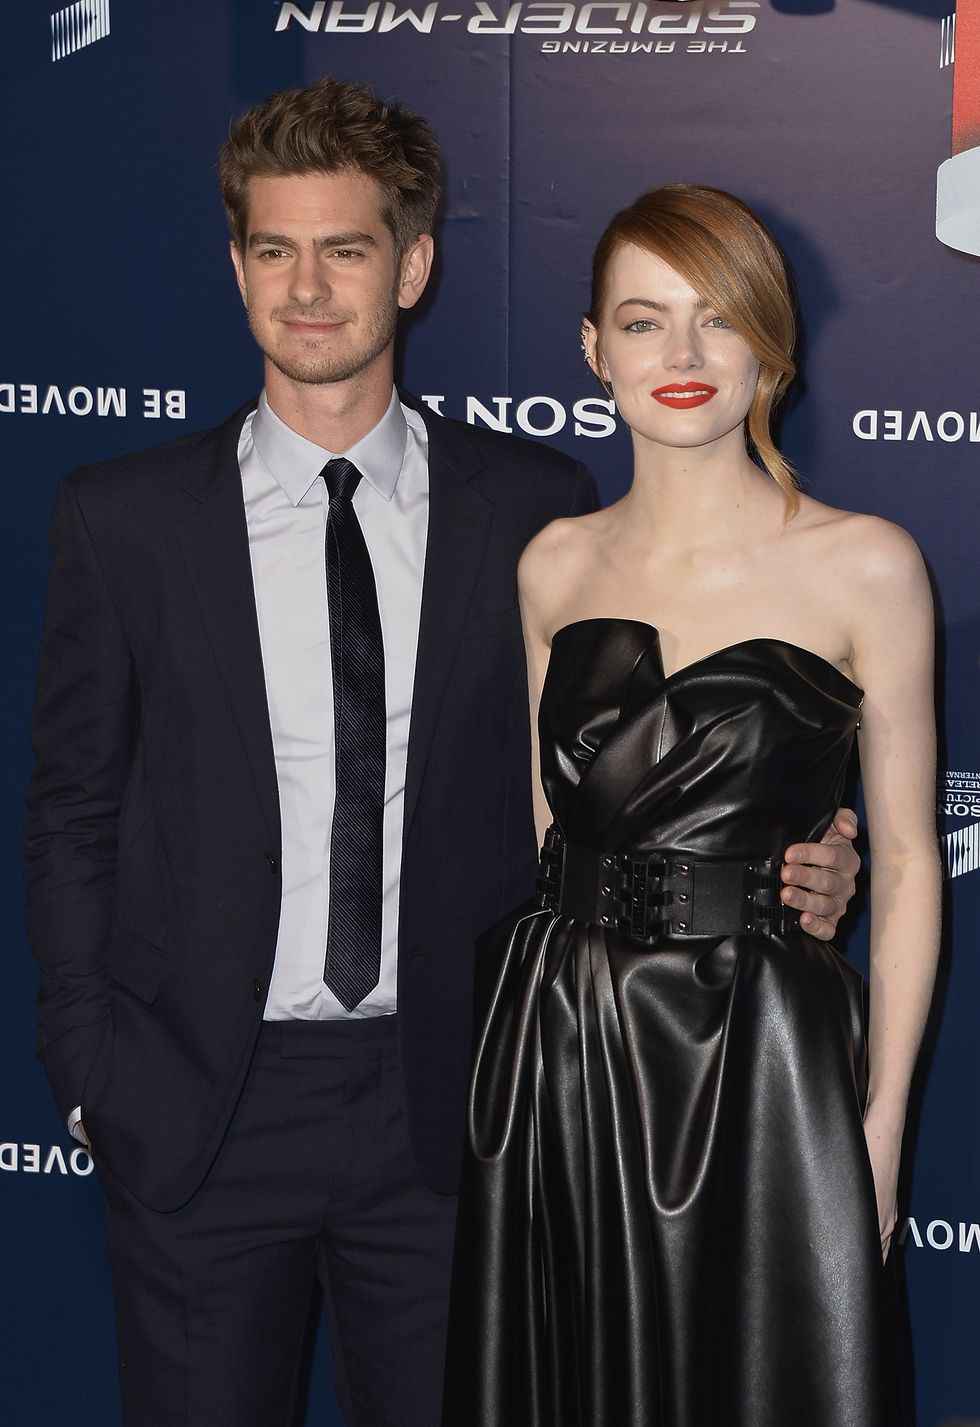 PARIS, FRANCE - APRIL 11:  Emma Stone and Andrew Garfield attend 'The Amazing Spider-Man 2' Paris Premiere at Le Grand Rex on April 11, 2014 in Paris, France.  (Photo by Pascal Le Segretain/WireImage)